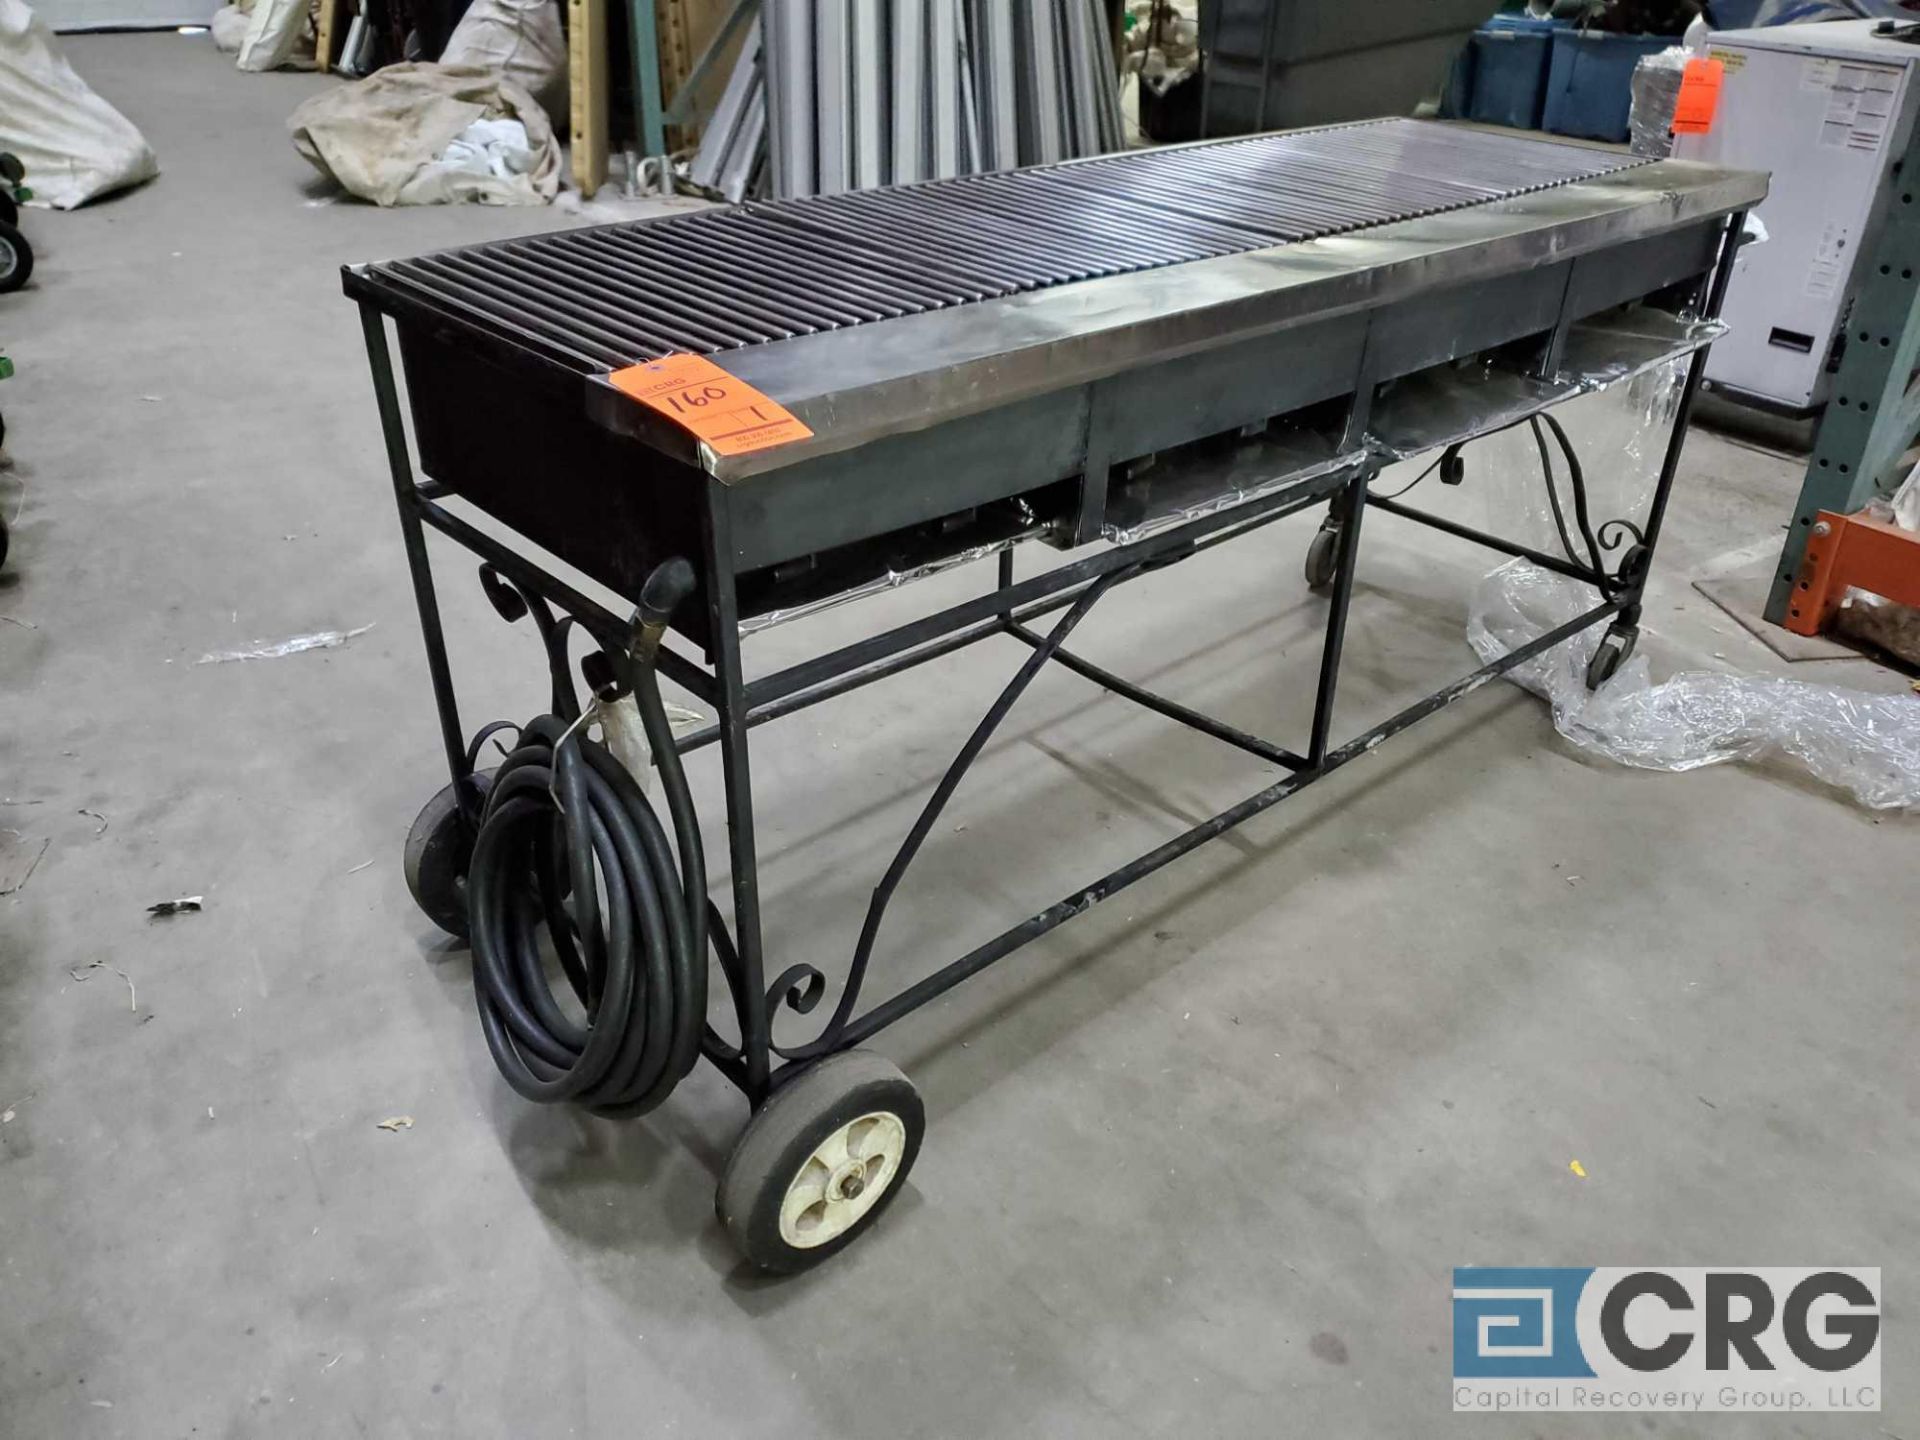 72 in. long x 24 in. deep portable propane grill - Image 6 of 6